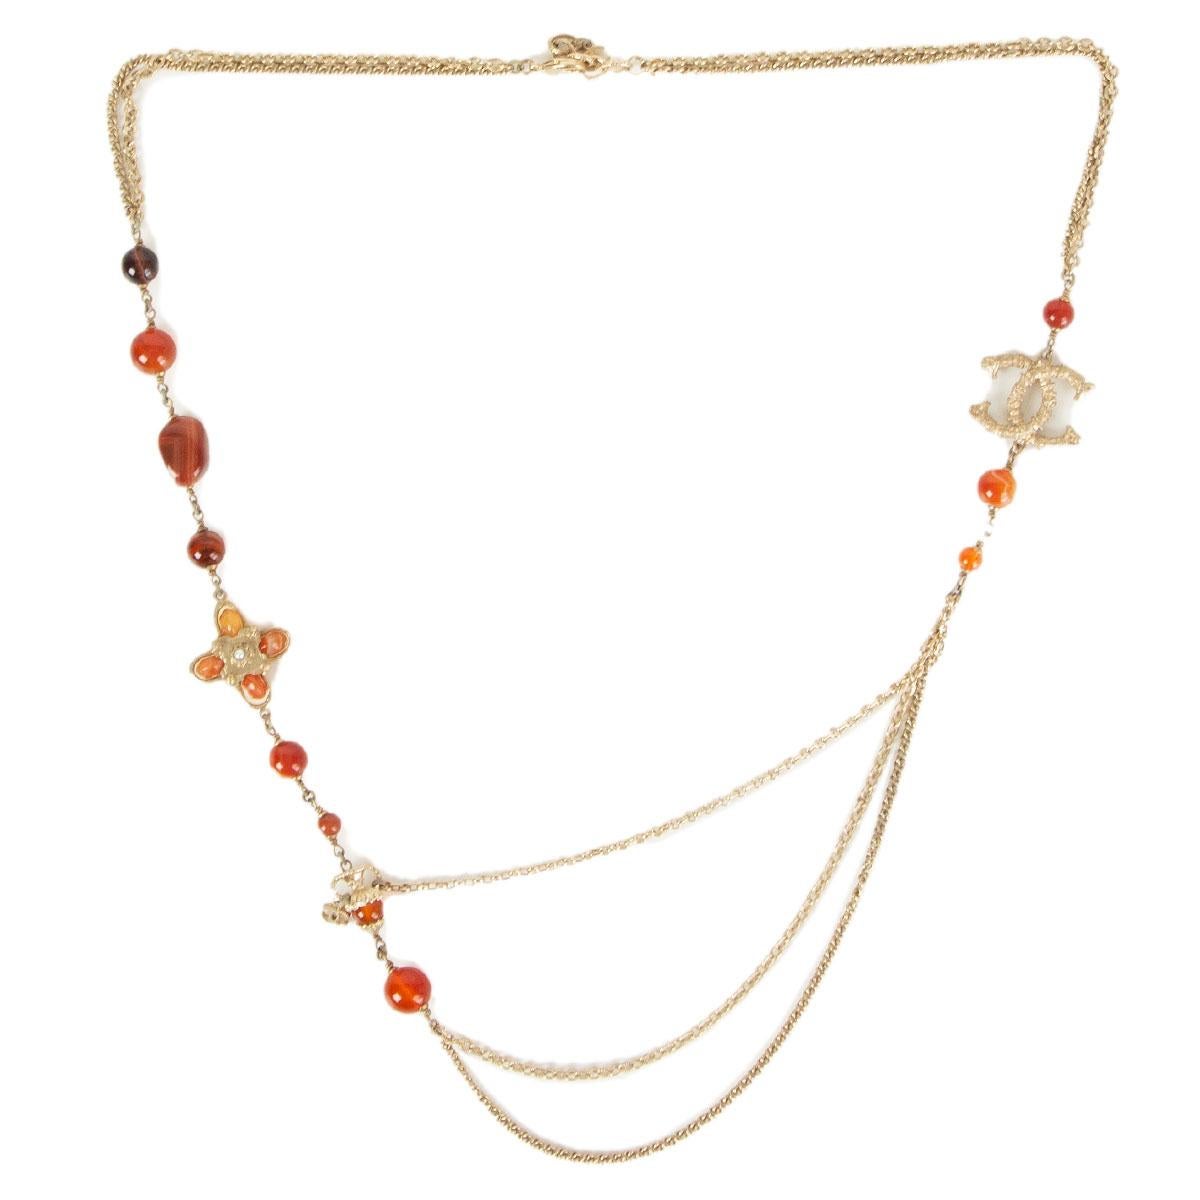 authentic Chanel Paris - Greece necklace in rust, orange, burgundy and honey colored faux stones embellished with CC logo in light-gold tone metal. Has been worn and is in excellent condition. 

Length 43cm (16.8in)
Hardware Light Gold-Tone
